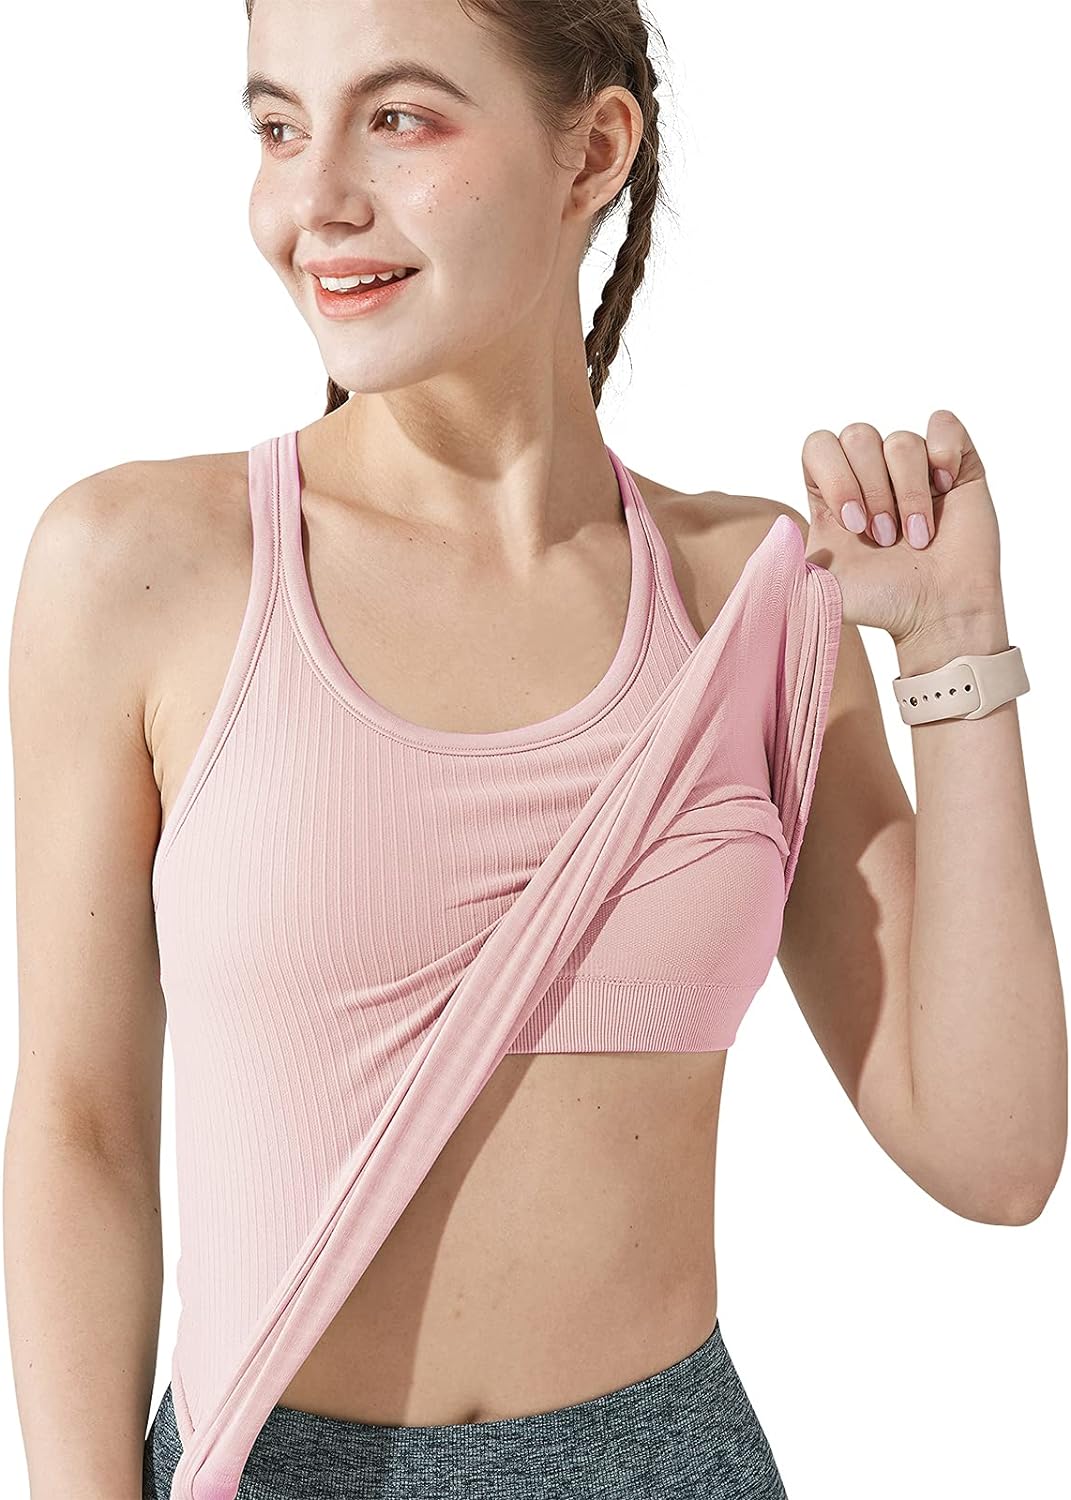 Yoga Racerback Tank Top for Women with Built in Bra,Women's Padded Sports Bra Fitness Workout Running Shirts